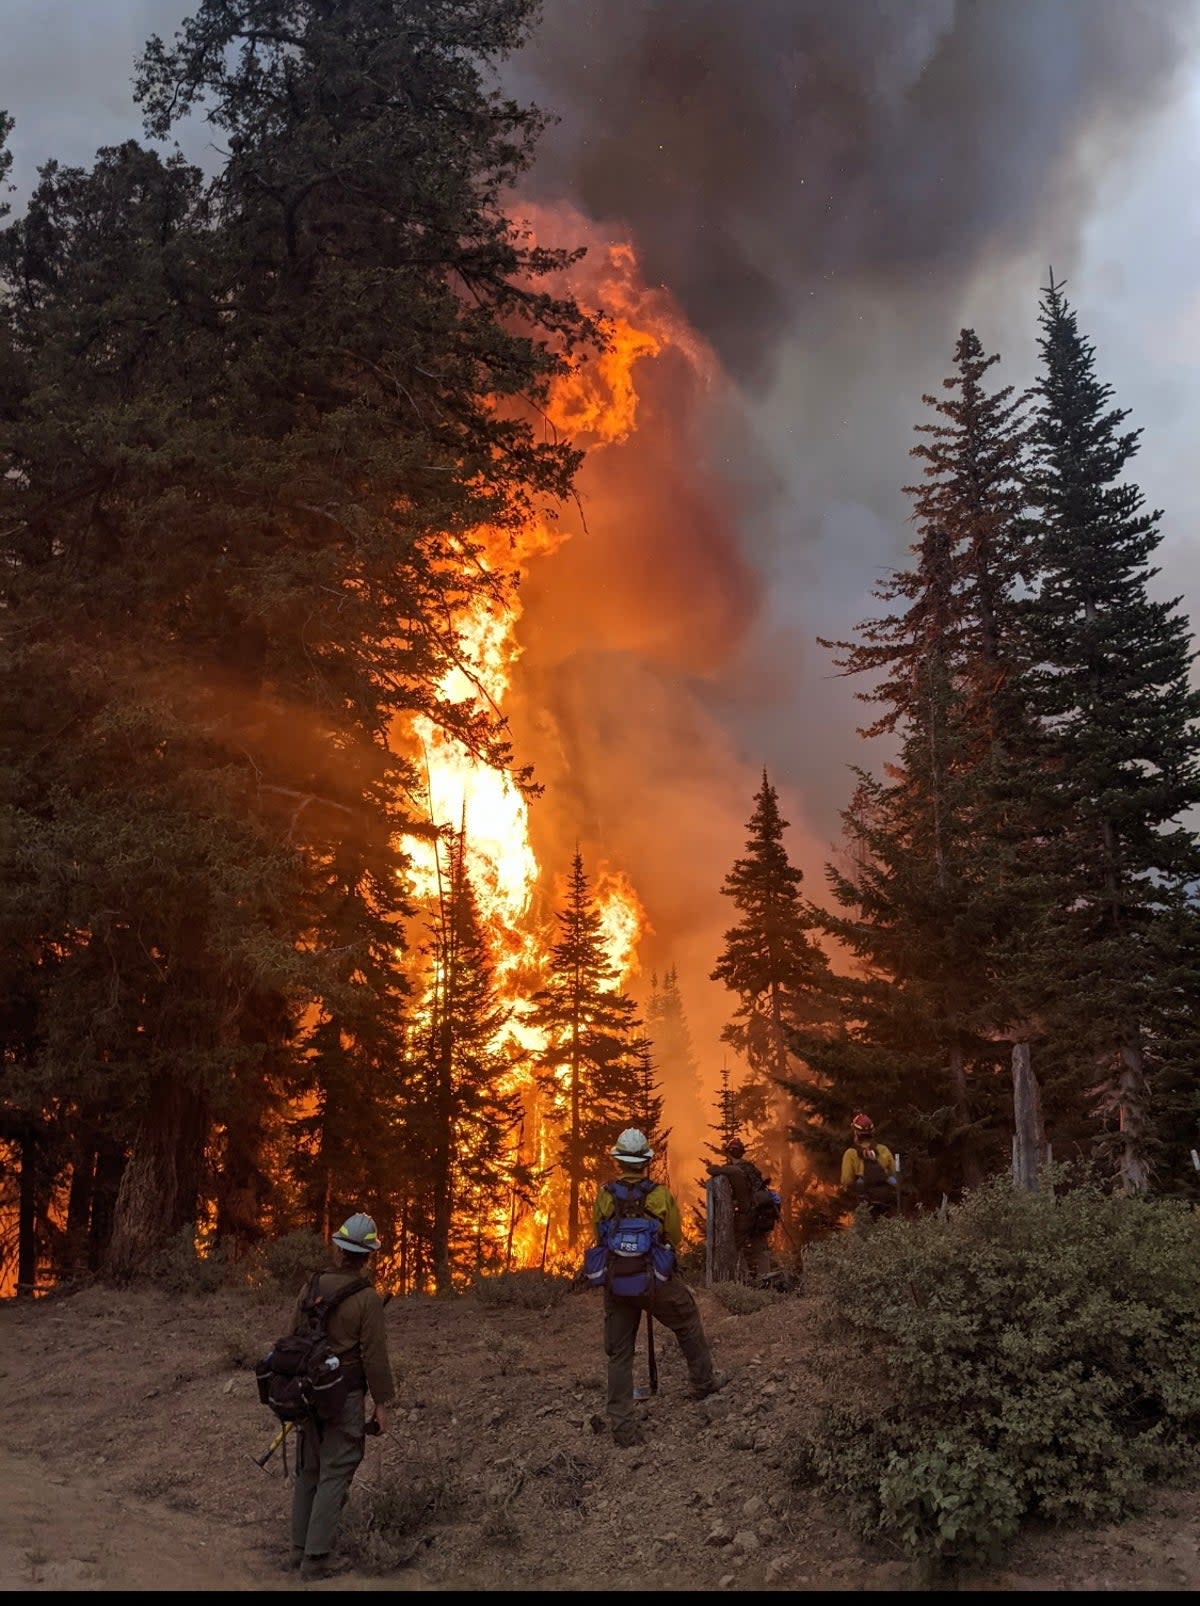 A wildland firefighting crew assess a fire in Washington state in 2021 (Courtesy of Ben McLane)